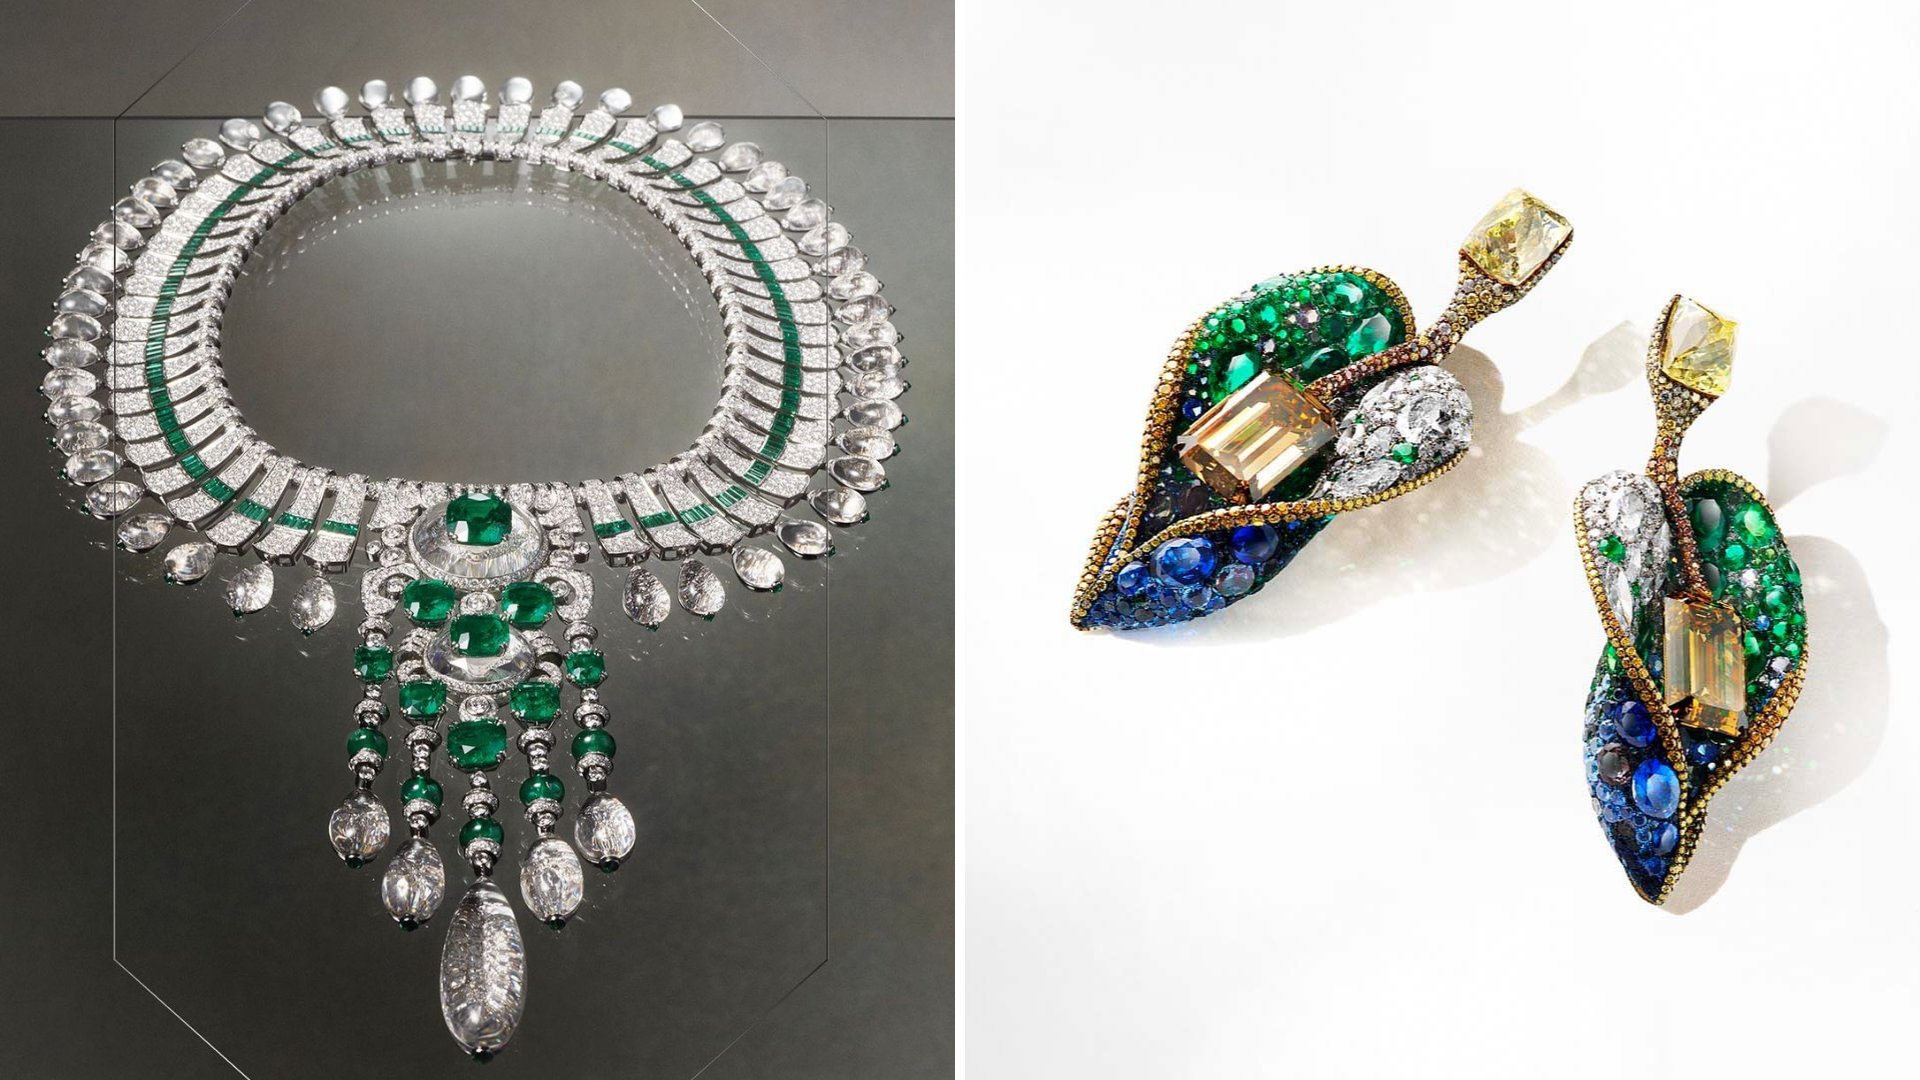 The Best New High Jewelry From Chopard, Cartier and Boucheron